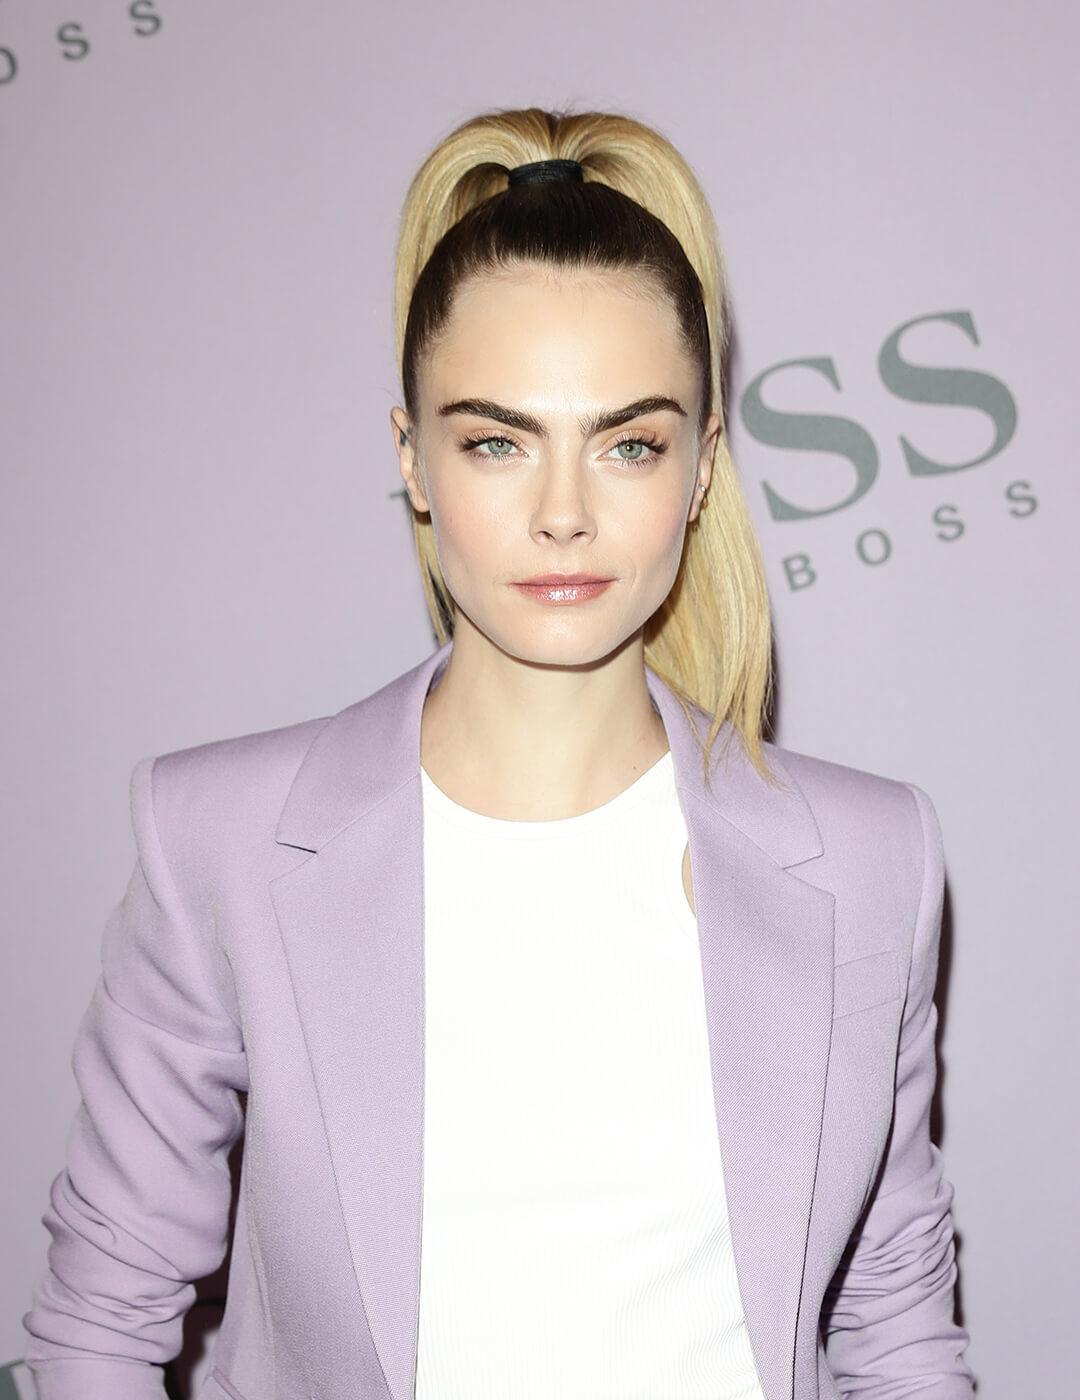 A photo of Cara Delevingne wearing a purple suit paired in white top with her blond hair styled in a simple classic chic ponytail